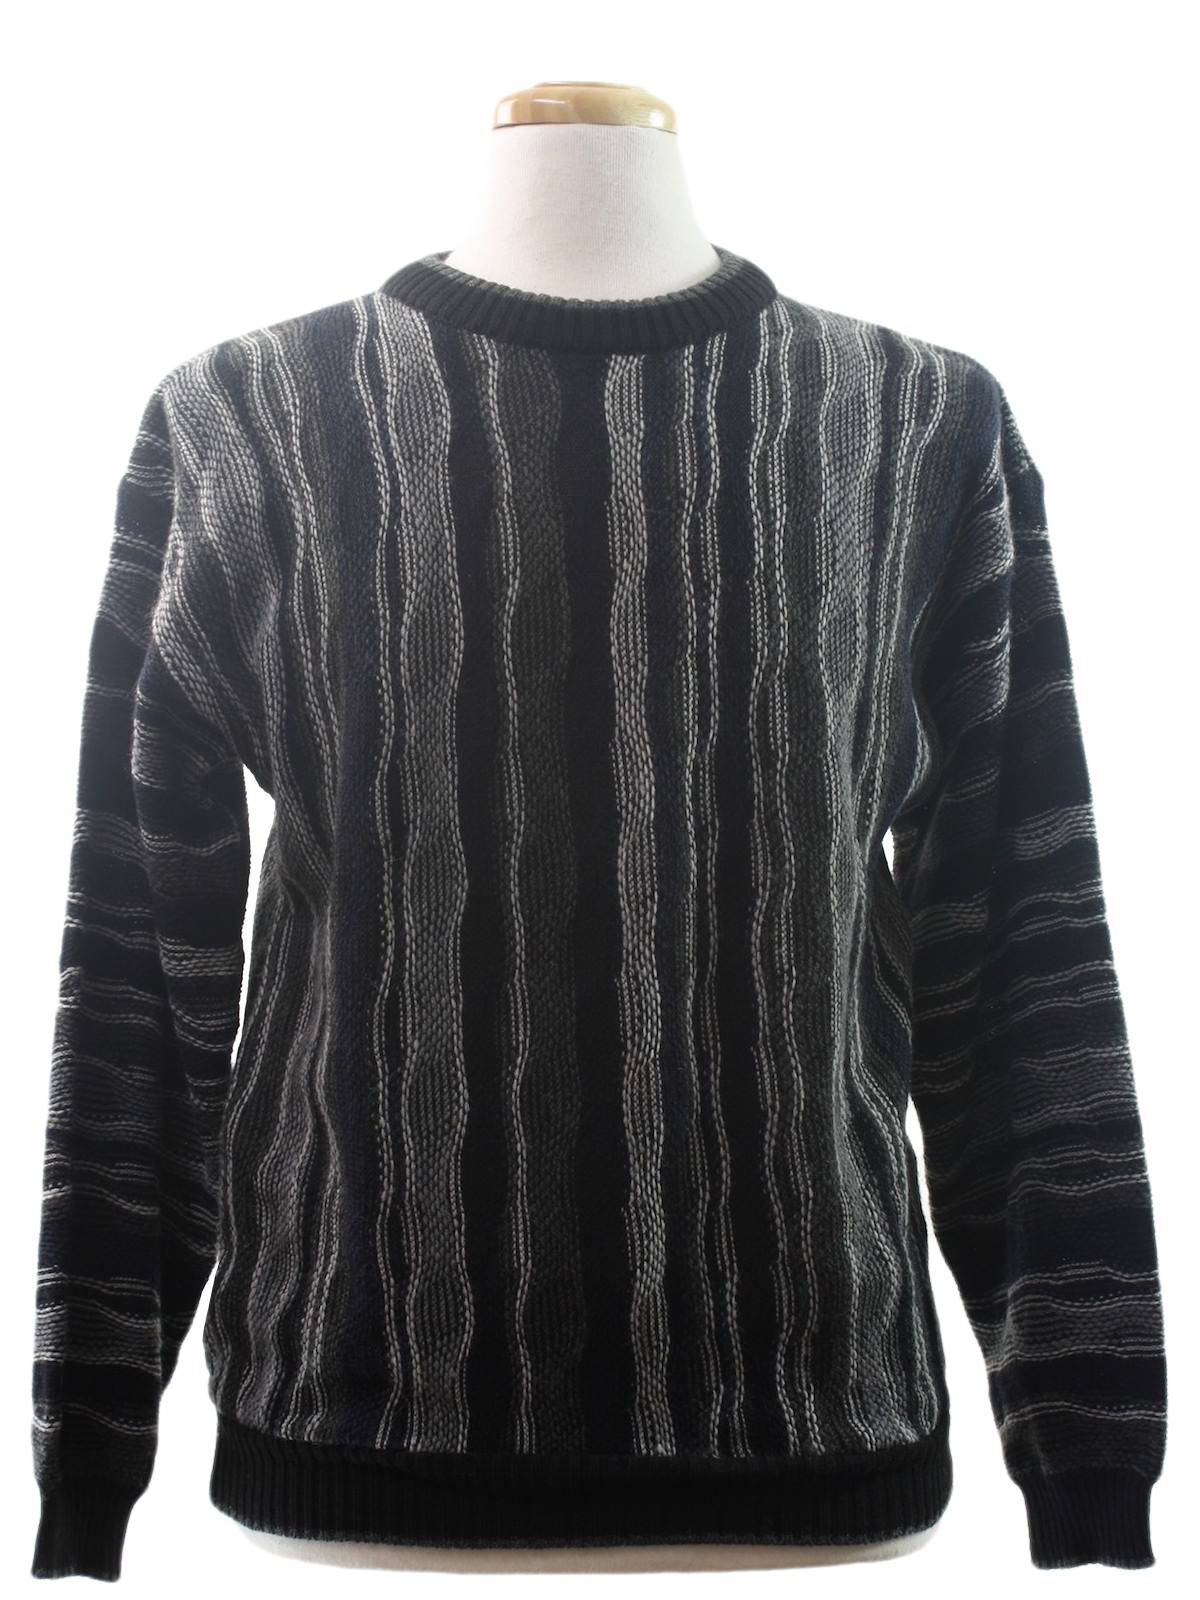 Vintage 1980's Sweater: 80s -Cortina Italia, Made in Italy- Mens black ...